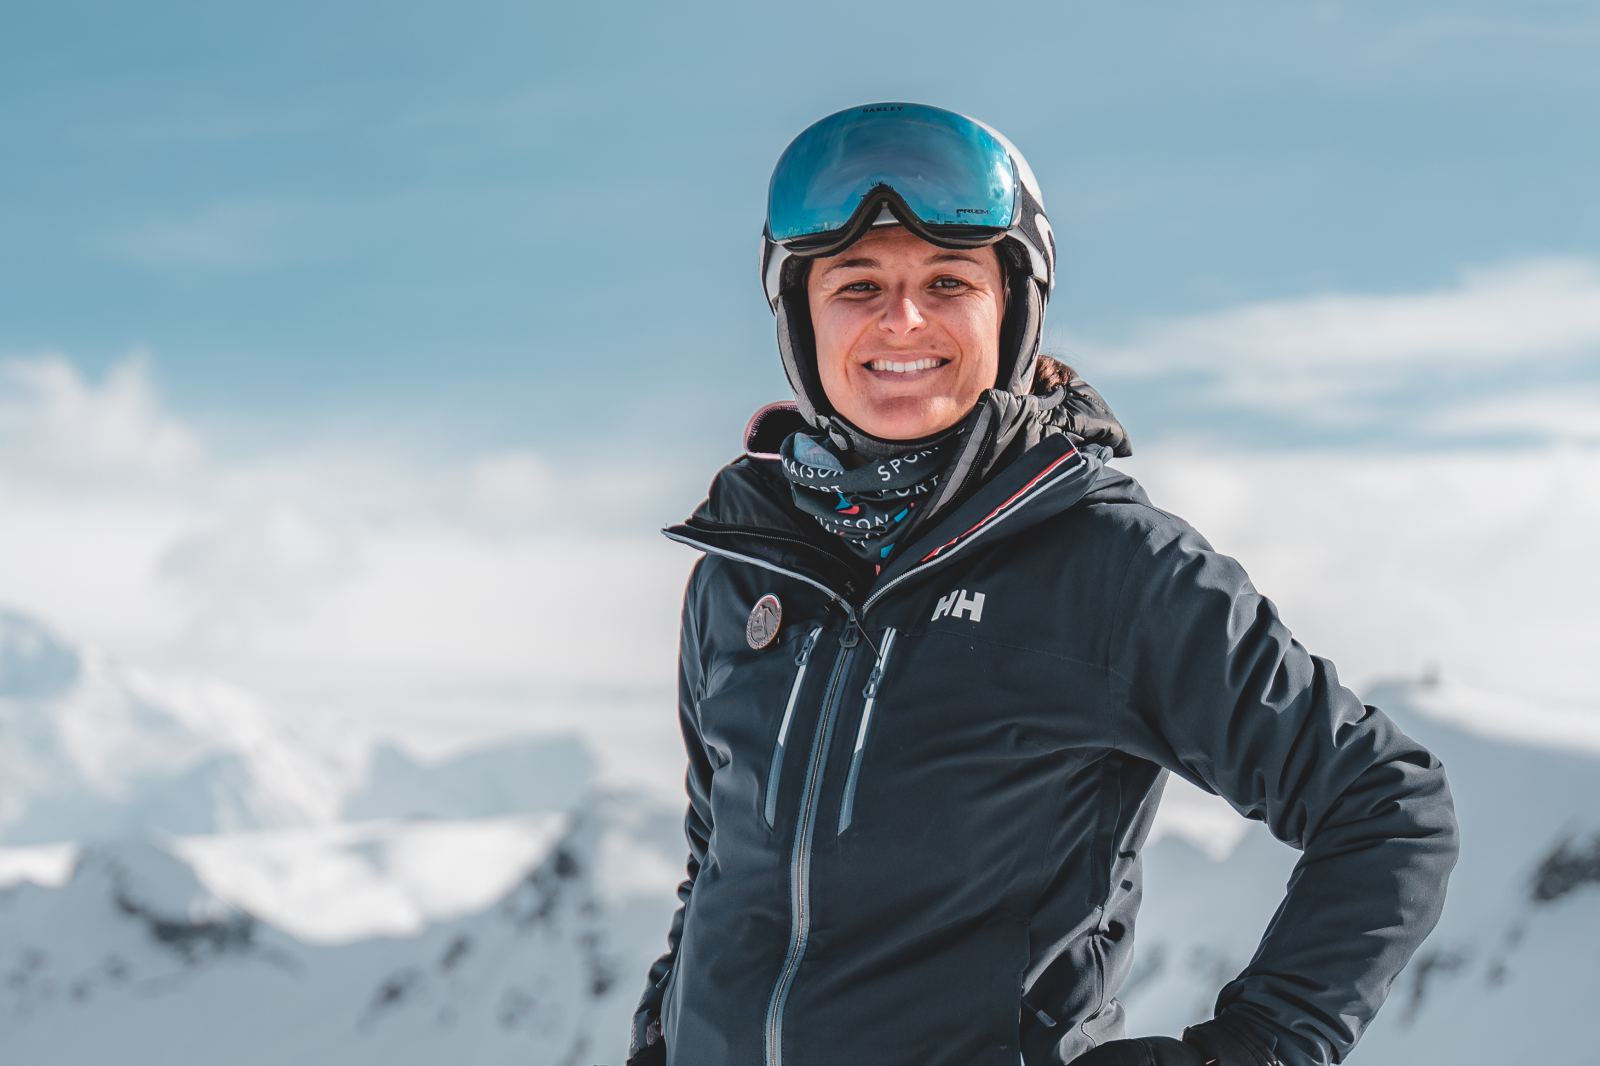 Safety first: 10 essential skiing tips for beginners to avoid skiing injuries on your first skiing trip